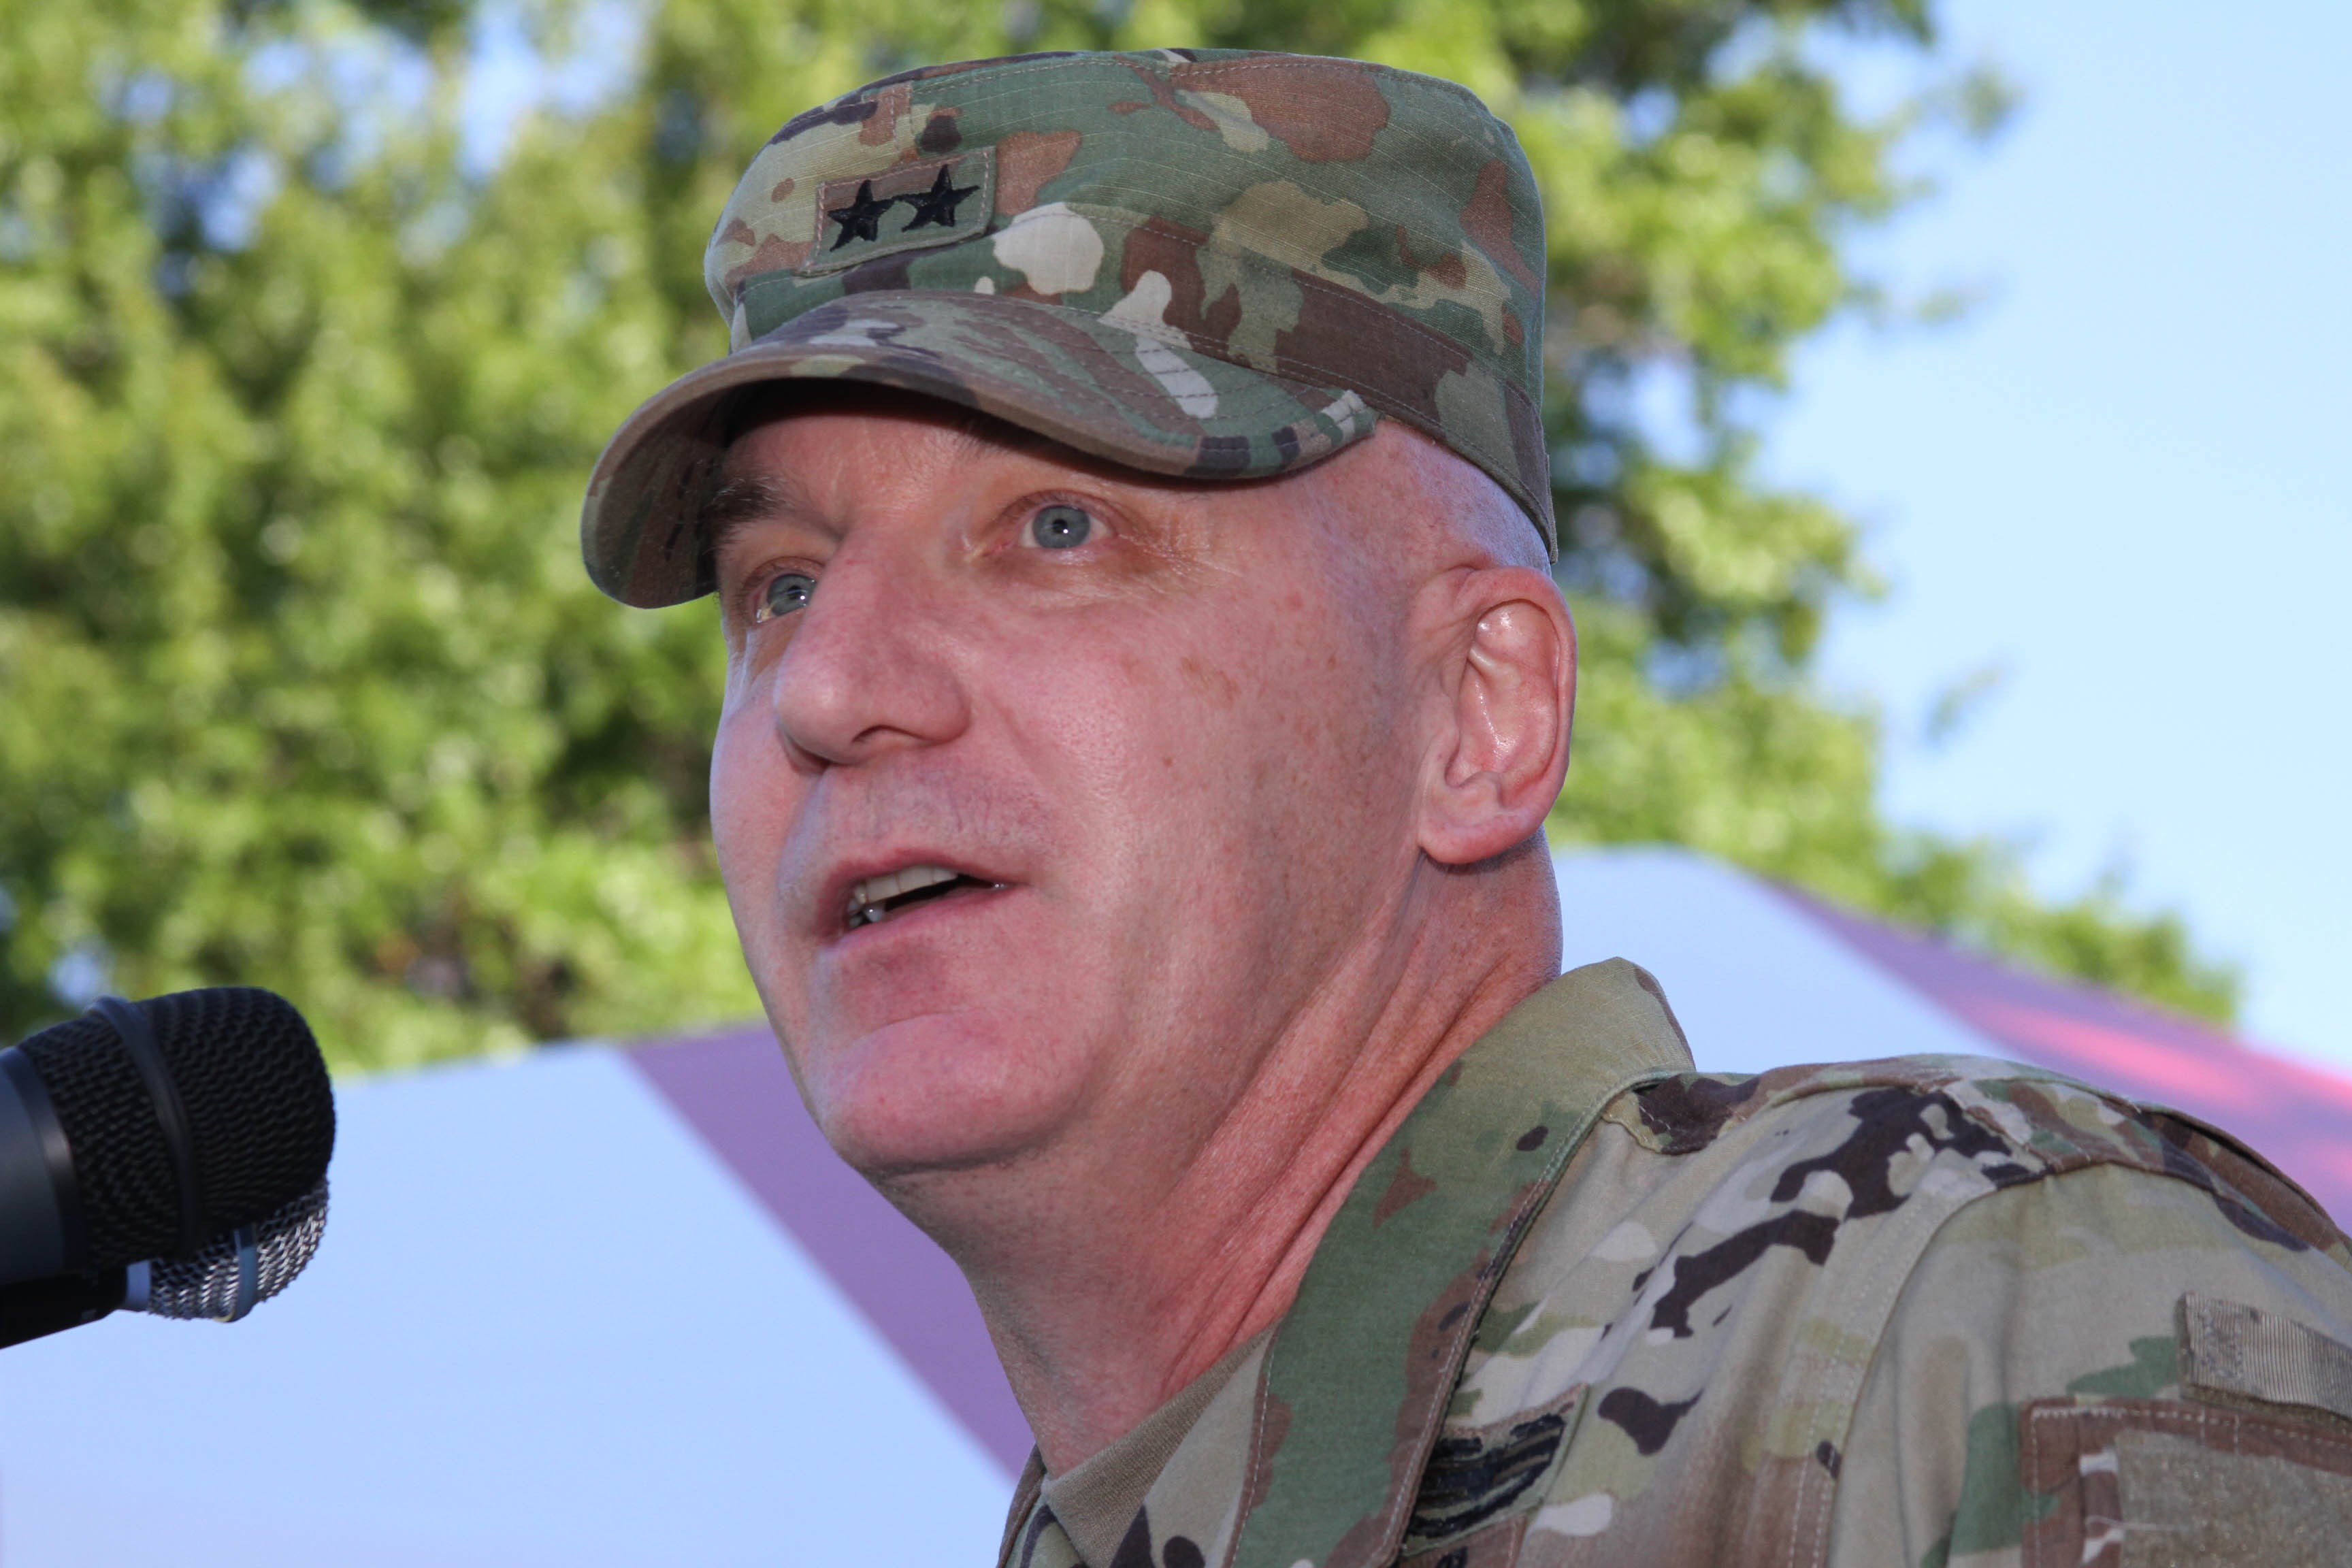 Fires Center Fort Sill Welcomes New Commander Article The United States Army 4424